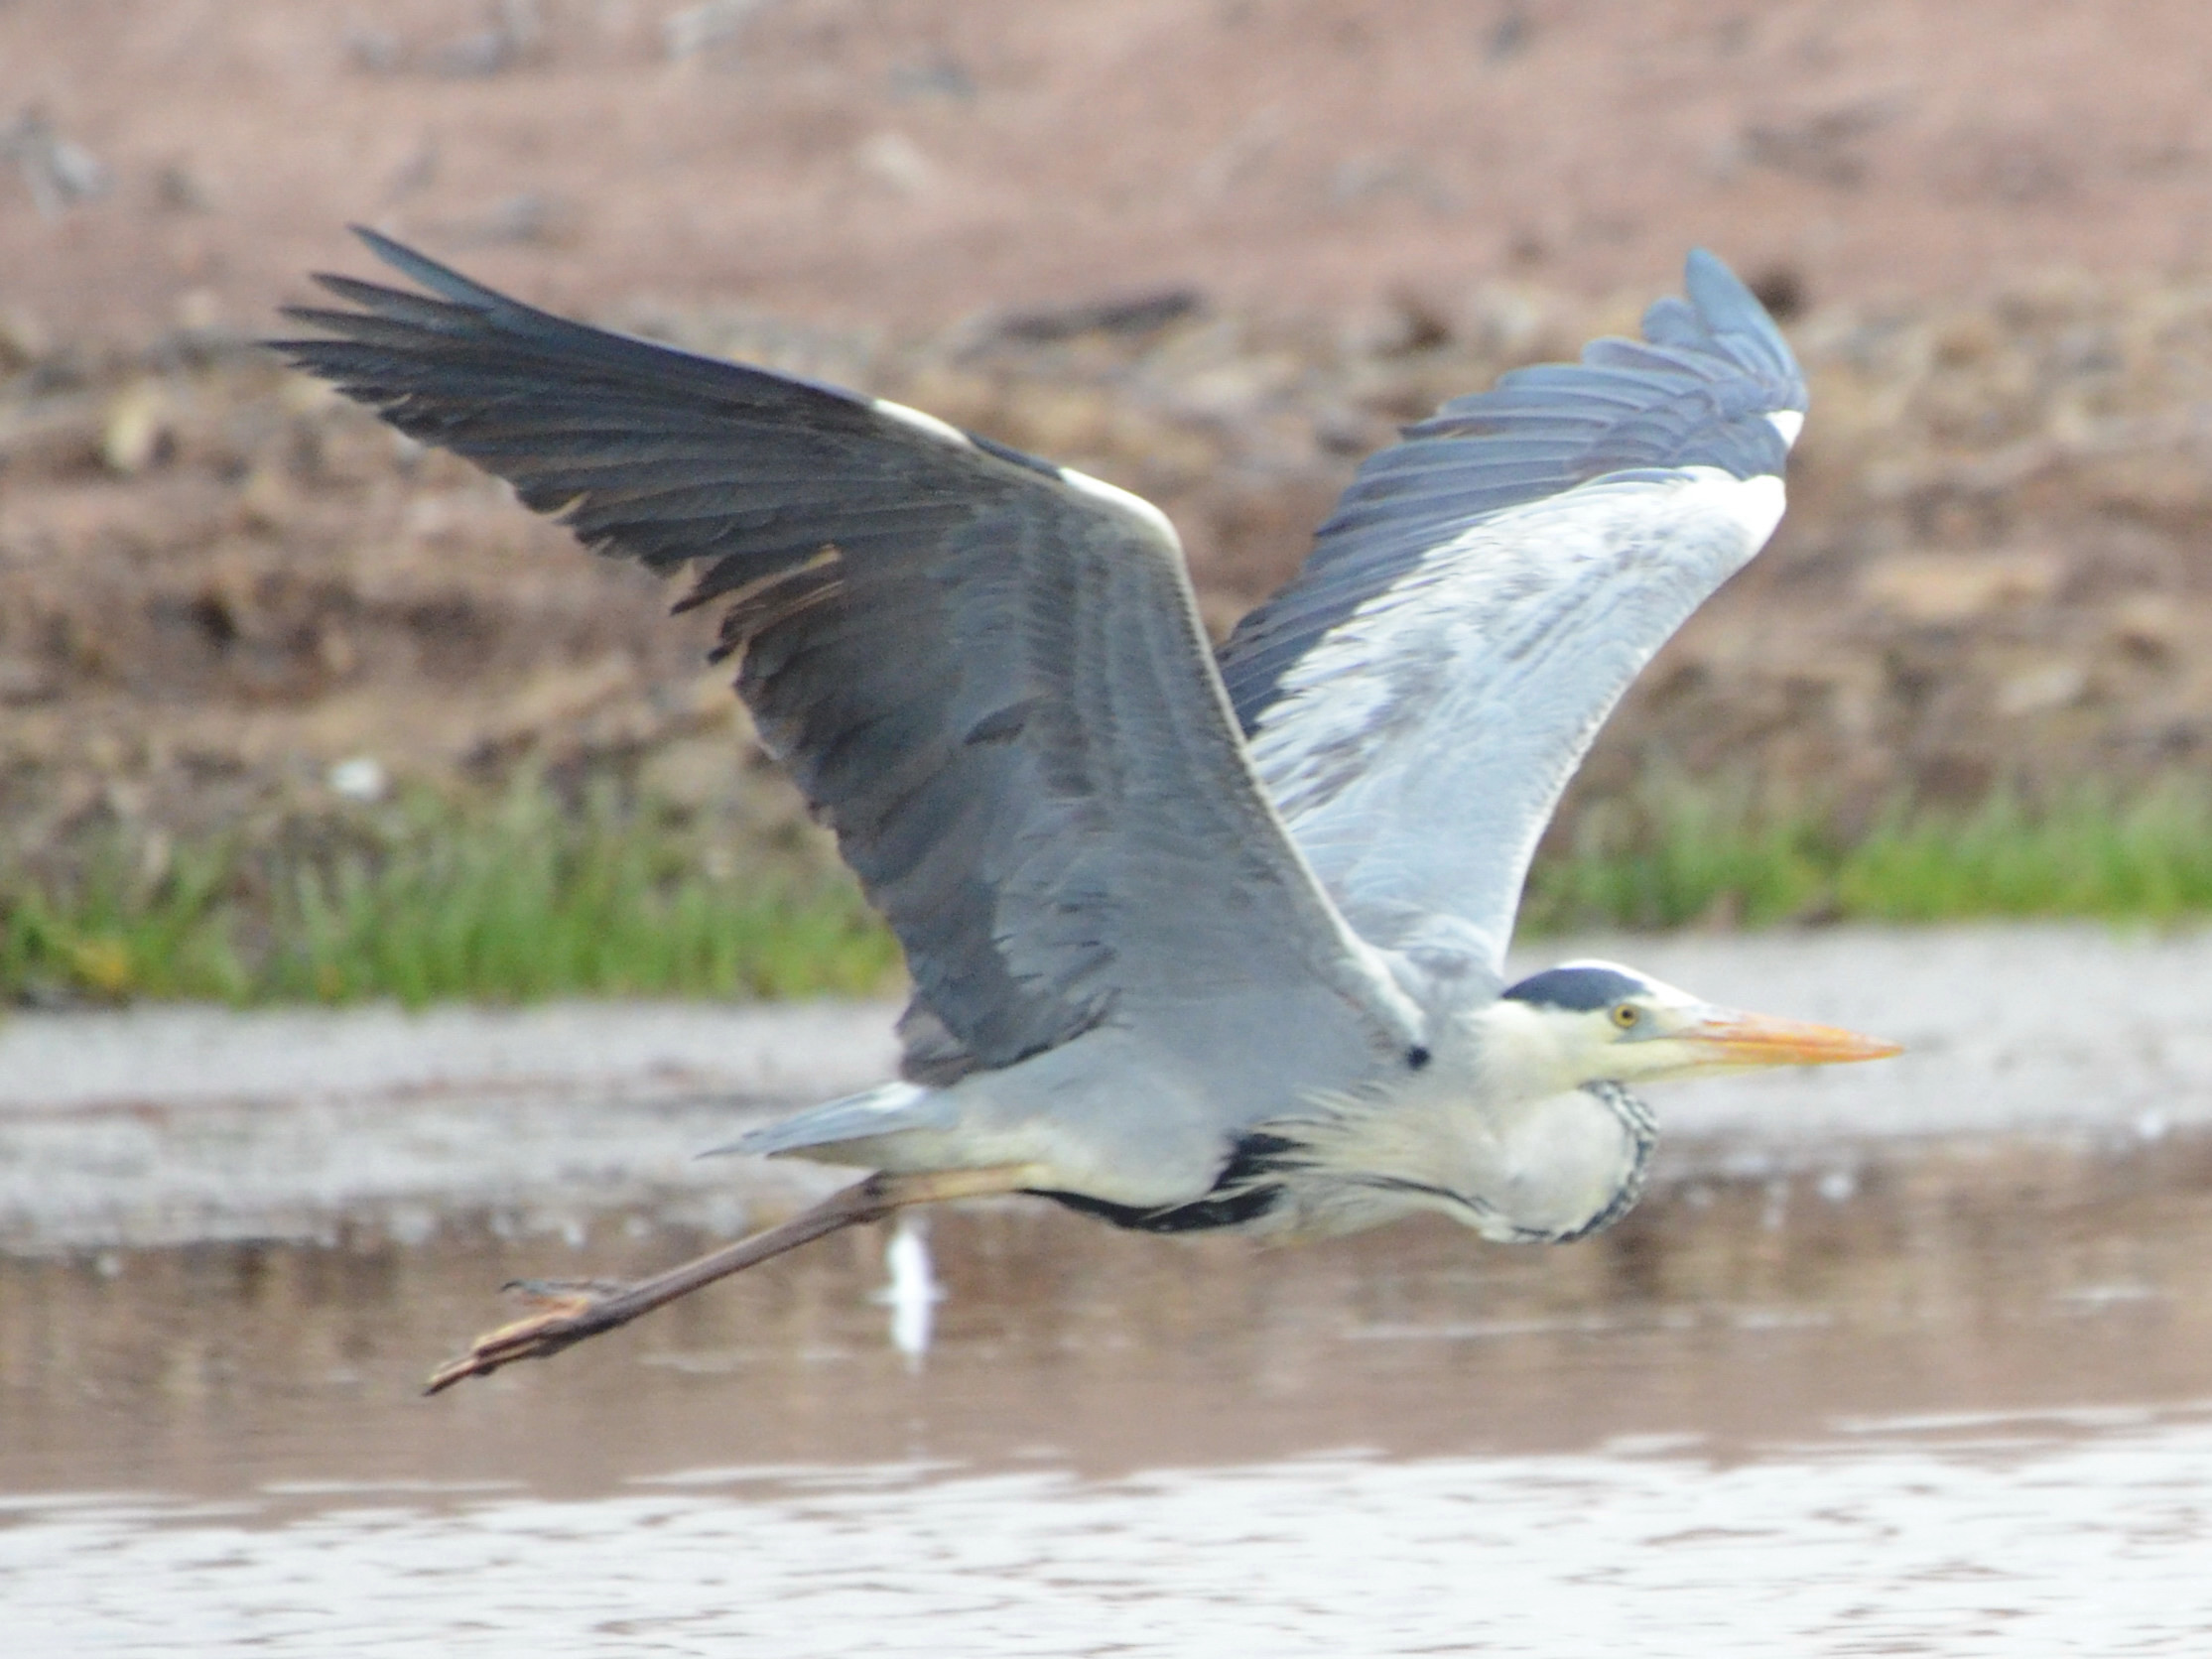 Click picture to see more Gray Herons.